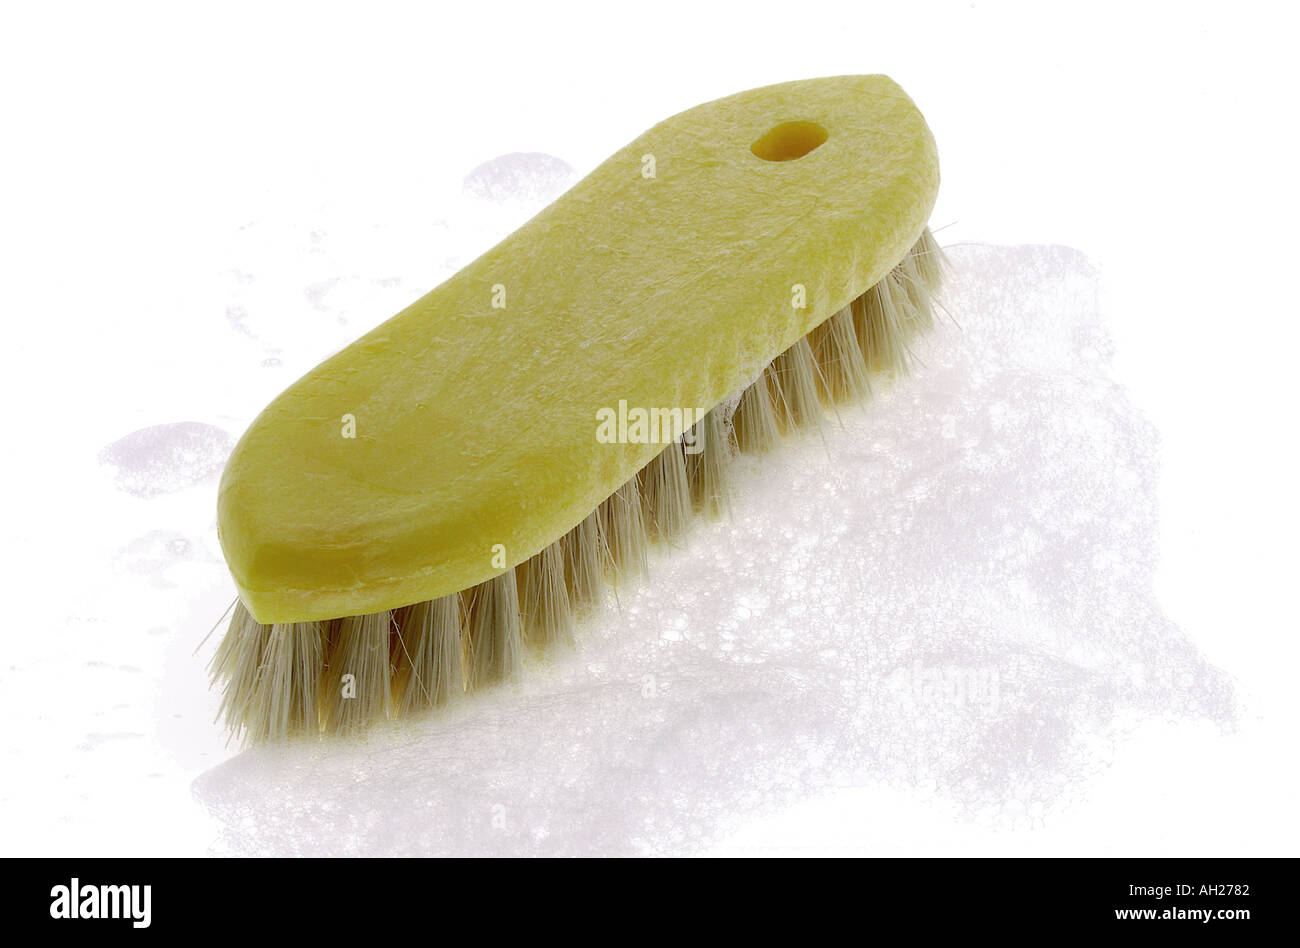 yellow scrub brush wth soap suds silhouetted on white background Stock Photo